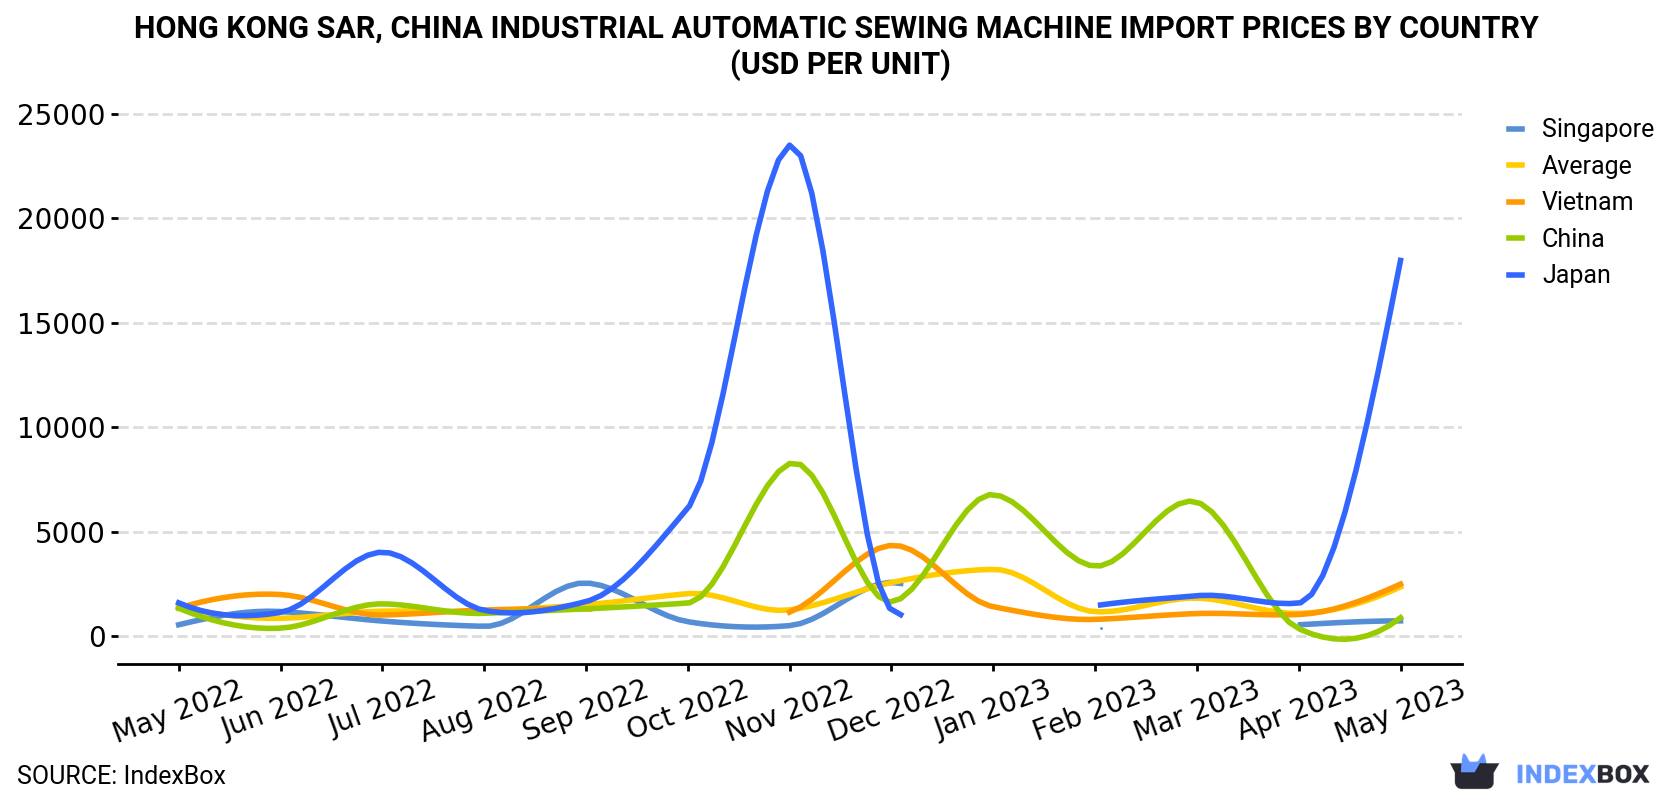 Hong Kong Industrial Automatic Sewing Machine Import Prices By Country (USD Per Unit)